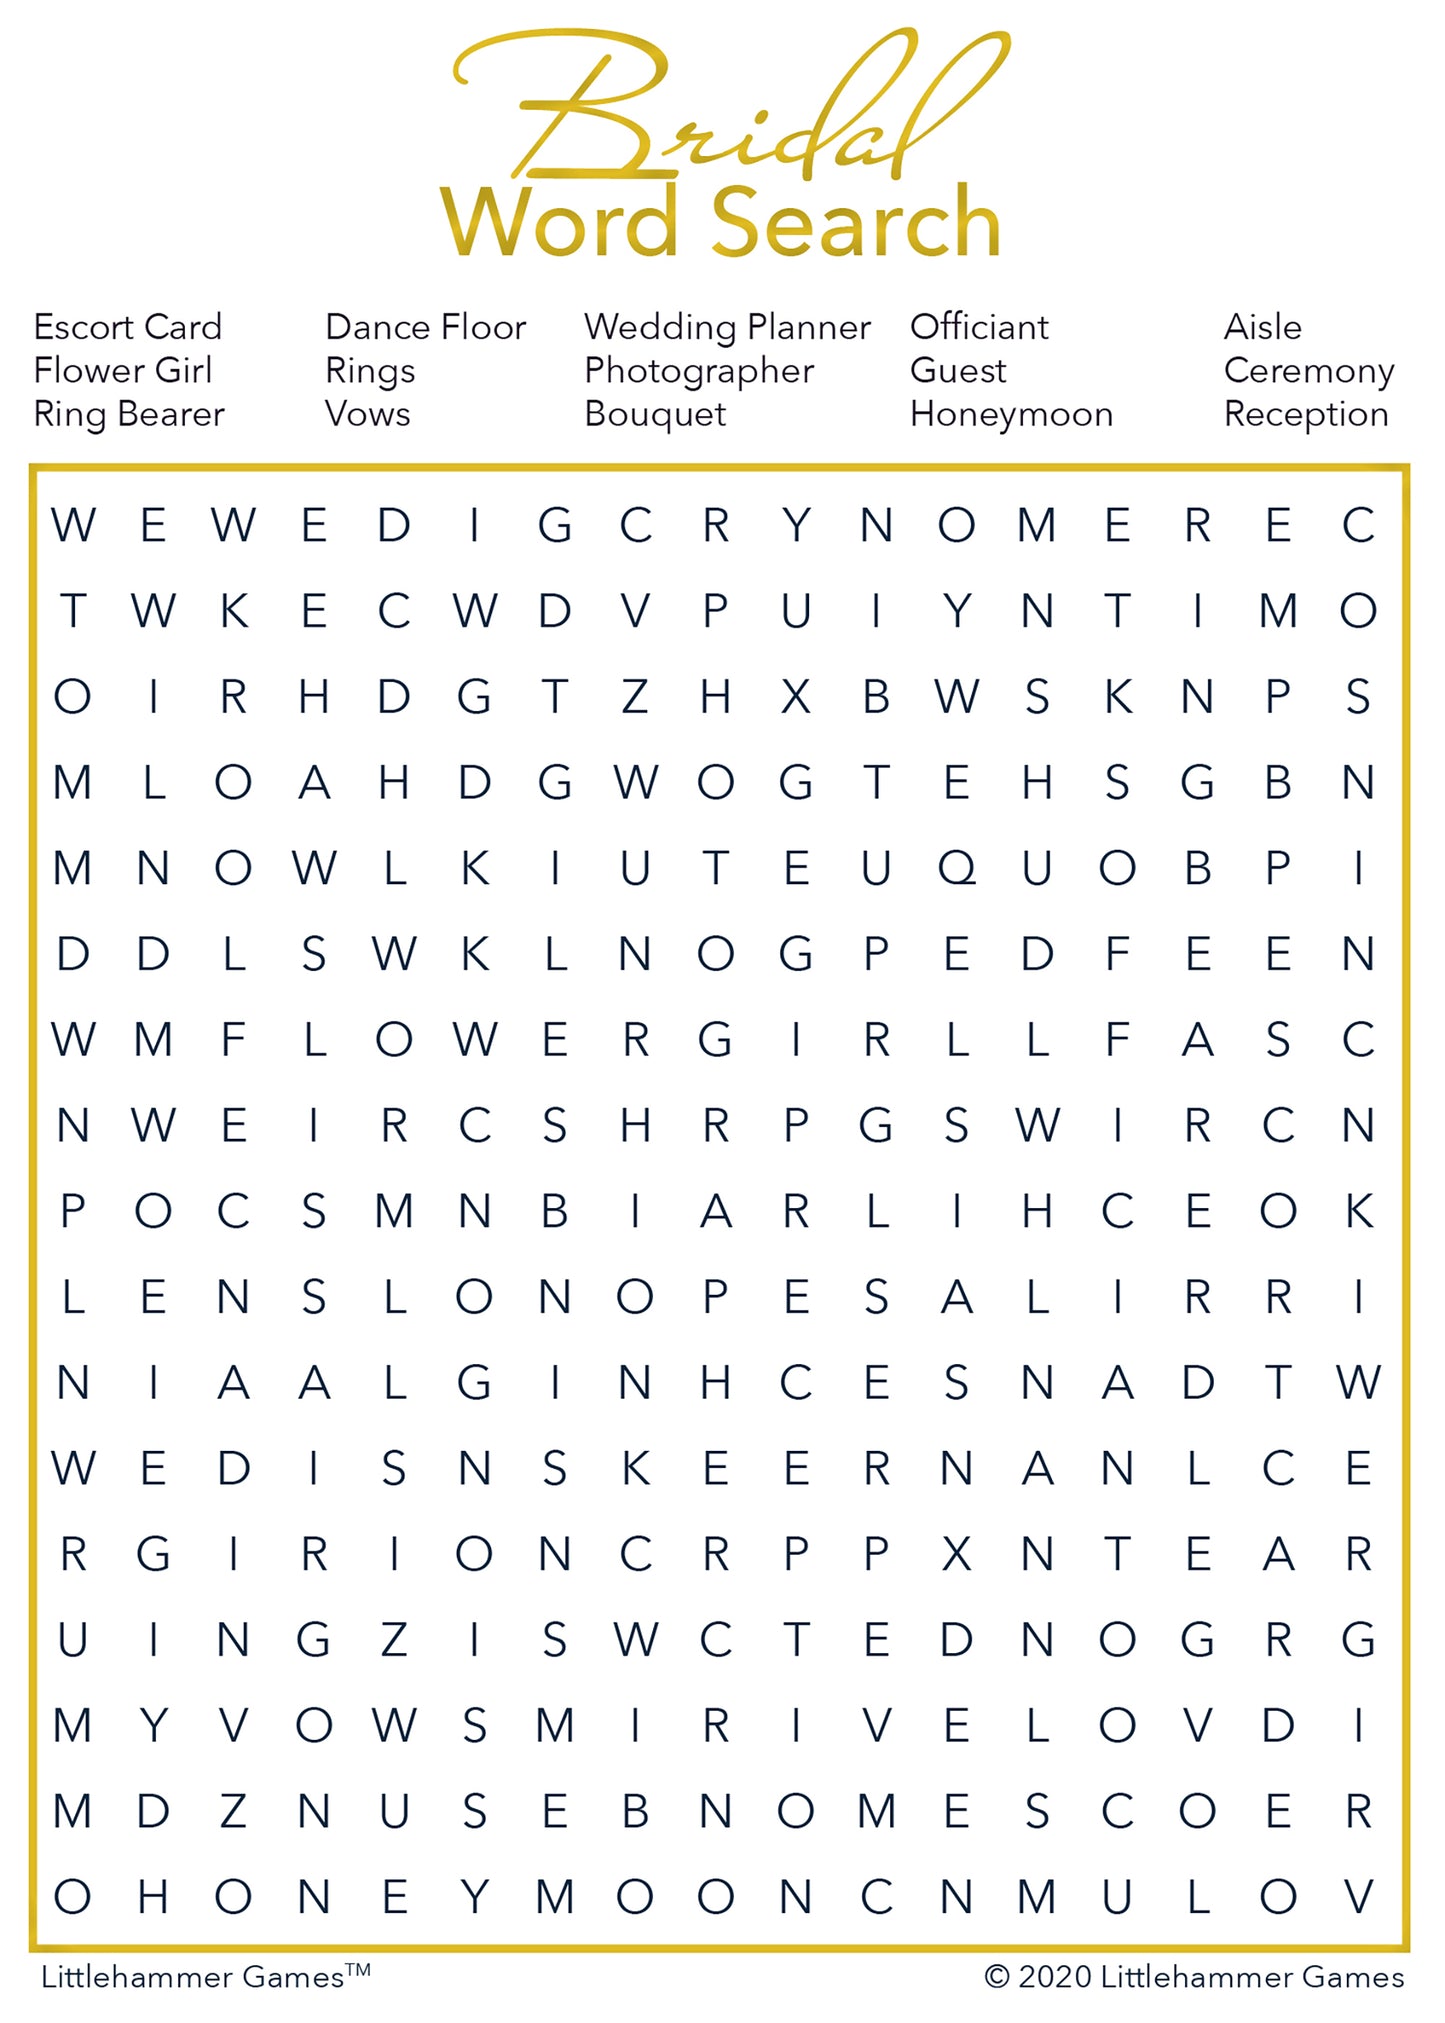 Bridal Word Search game card with a gold and white background